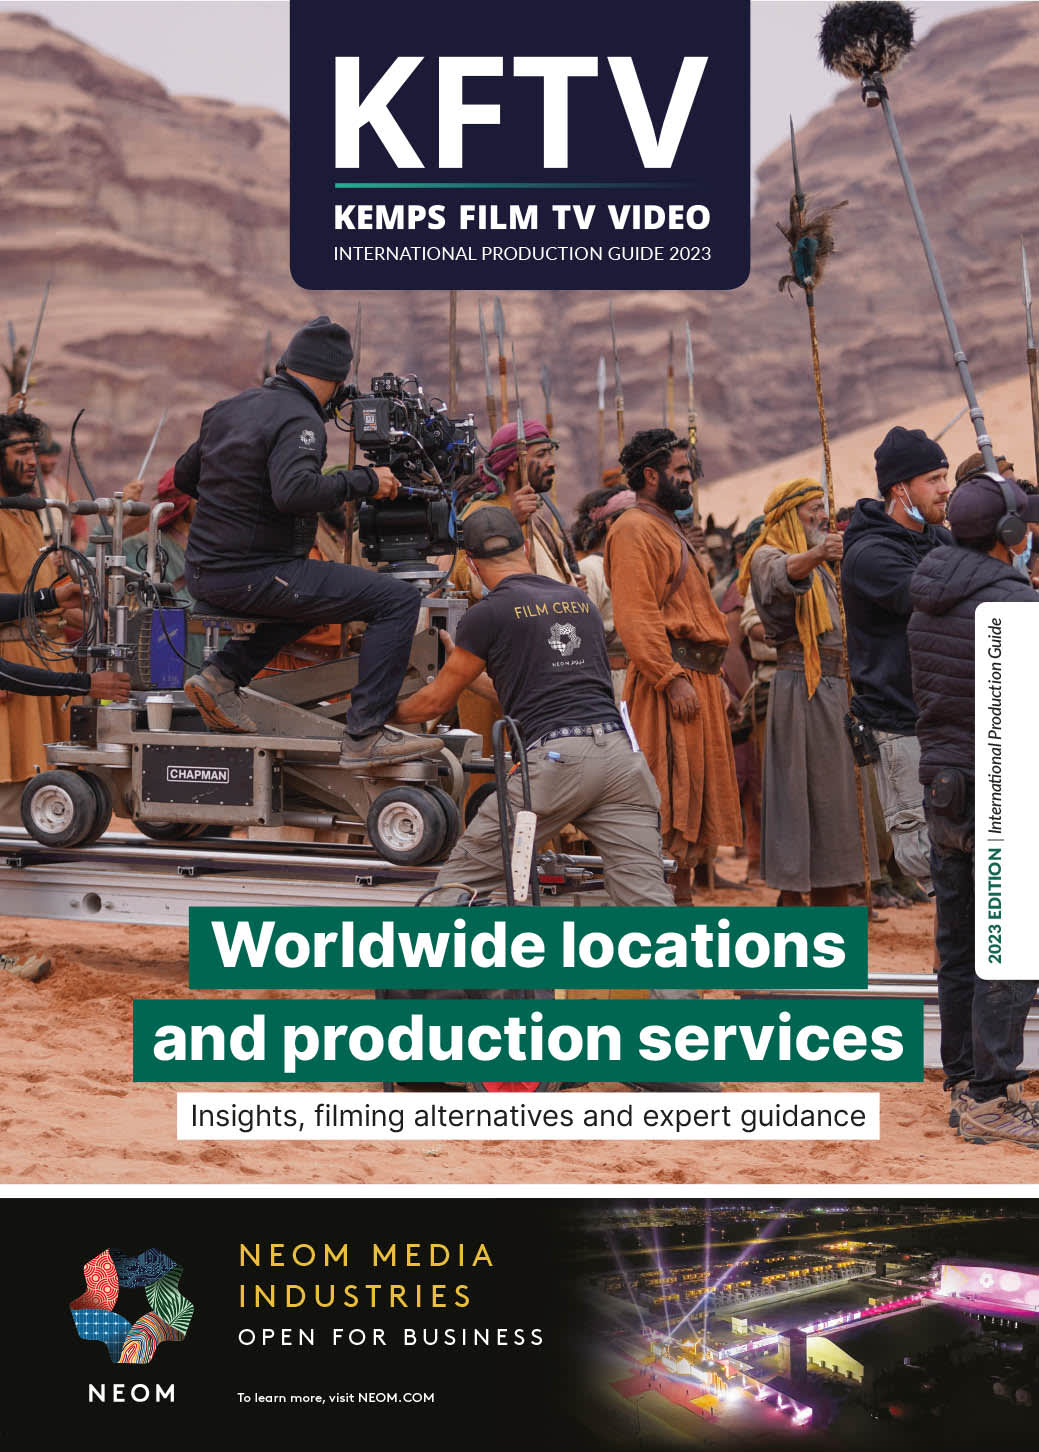 International Production Guide — 2023 is out now